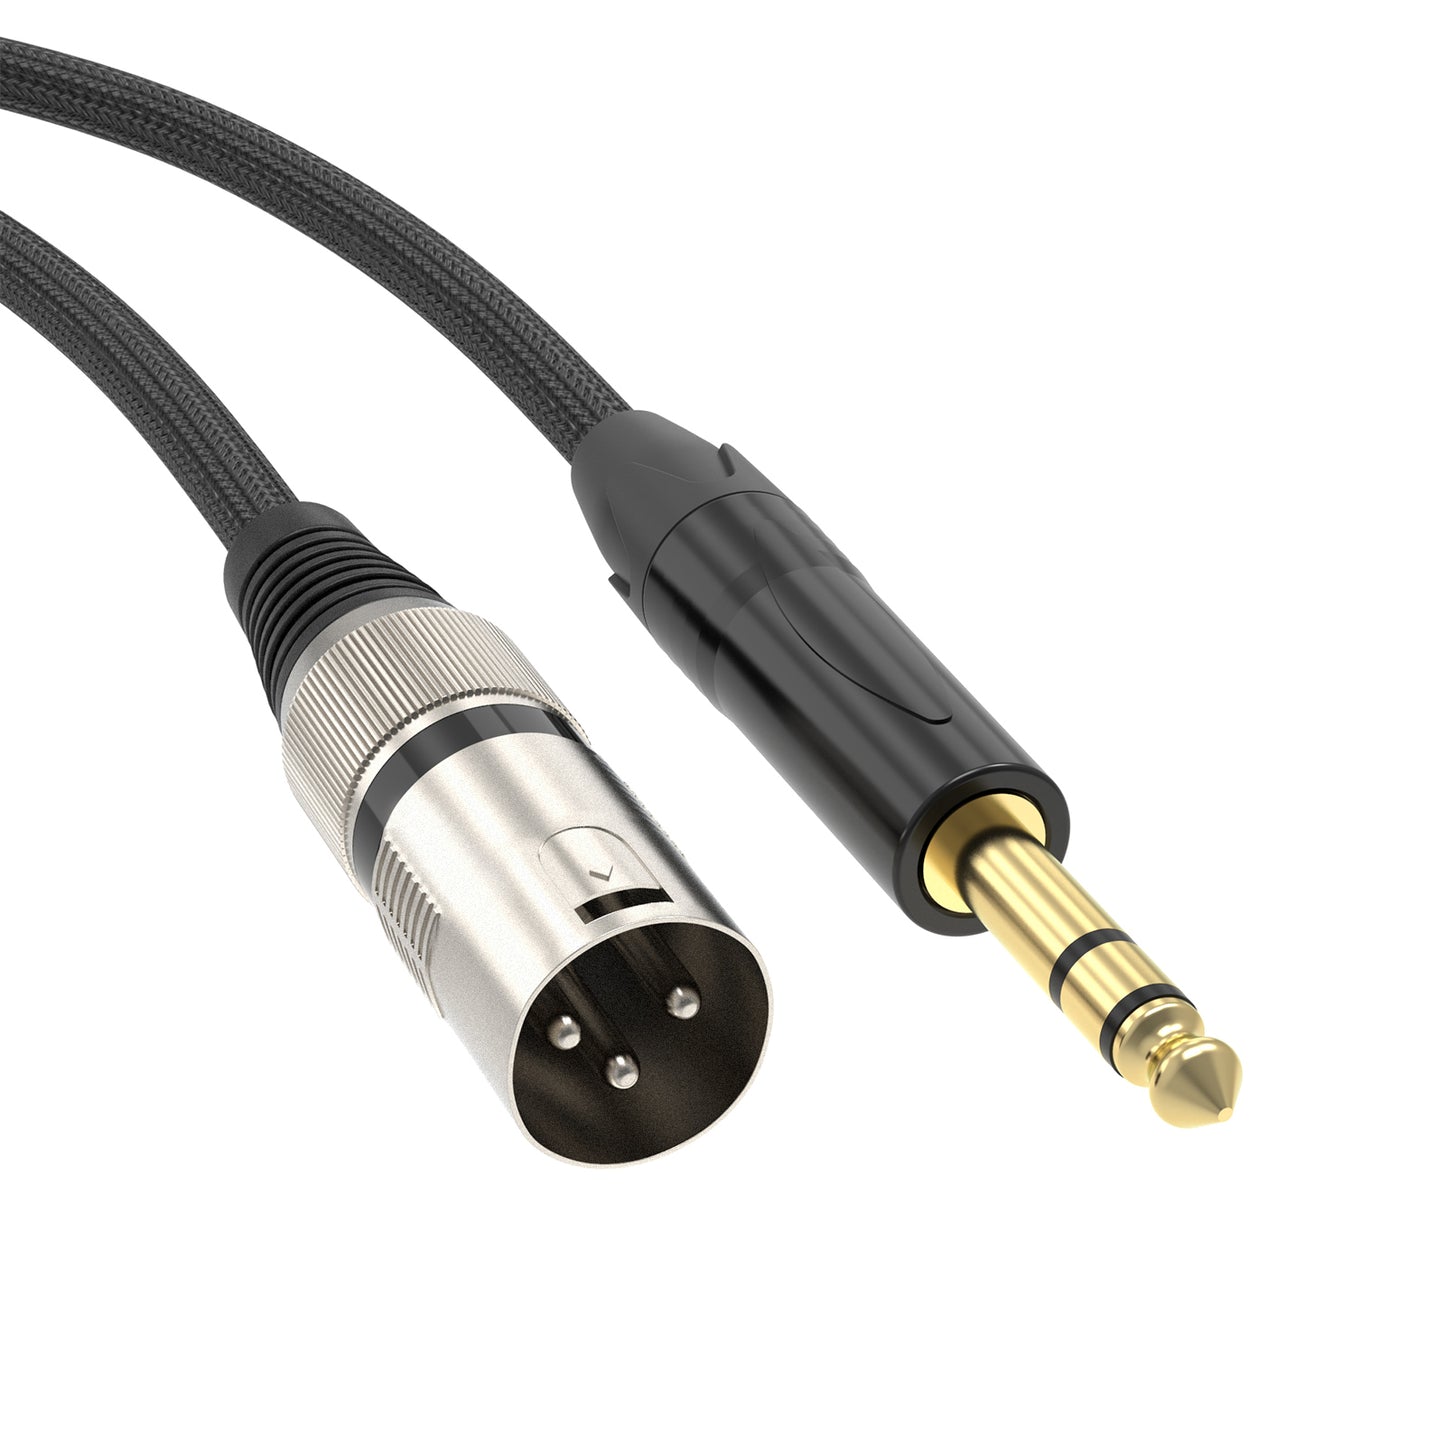 XLR Male to 6.35 TRS Jack Cable